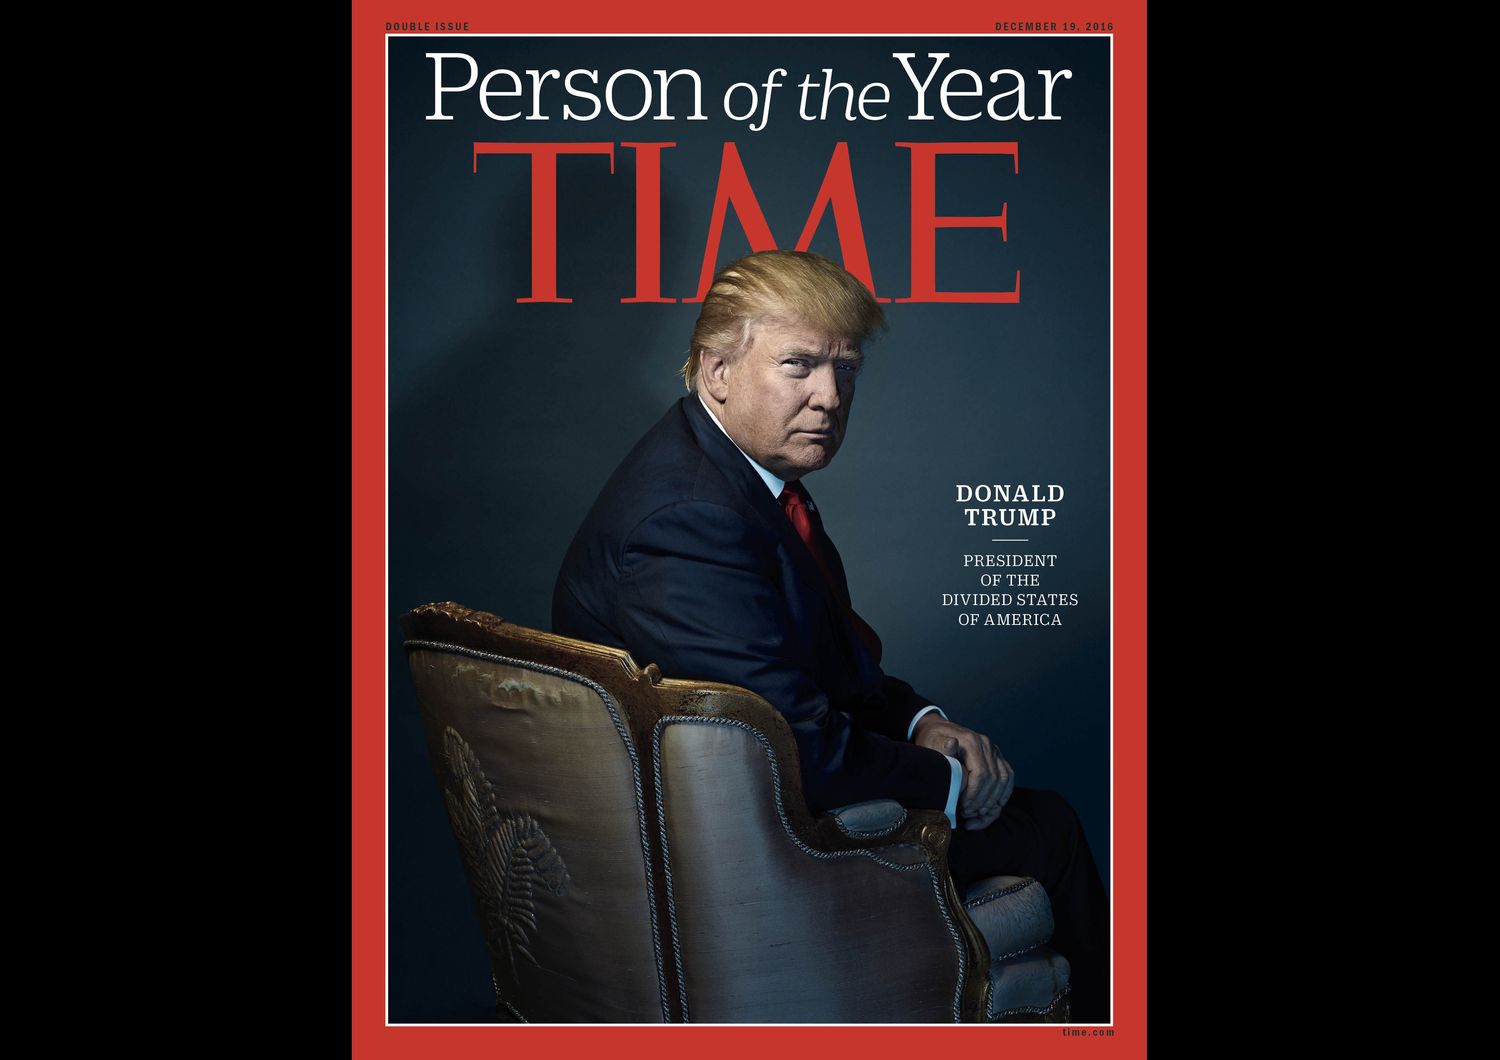 &nbsp;Time, person of the year 2016